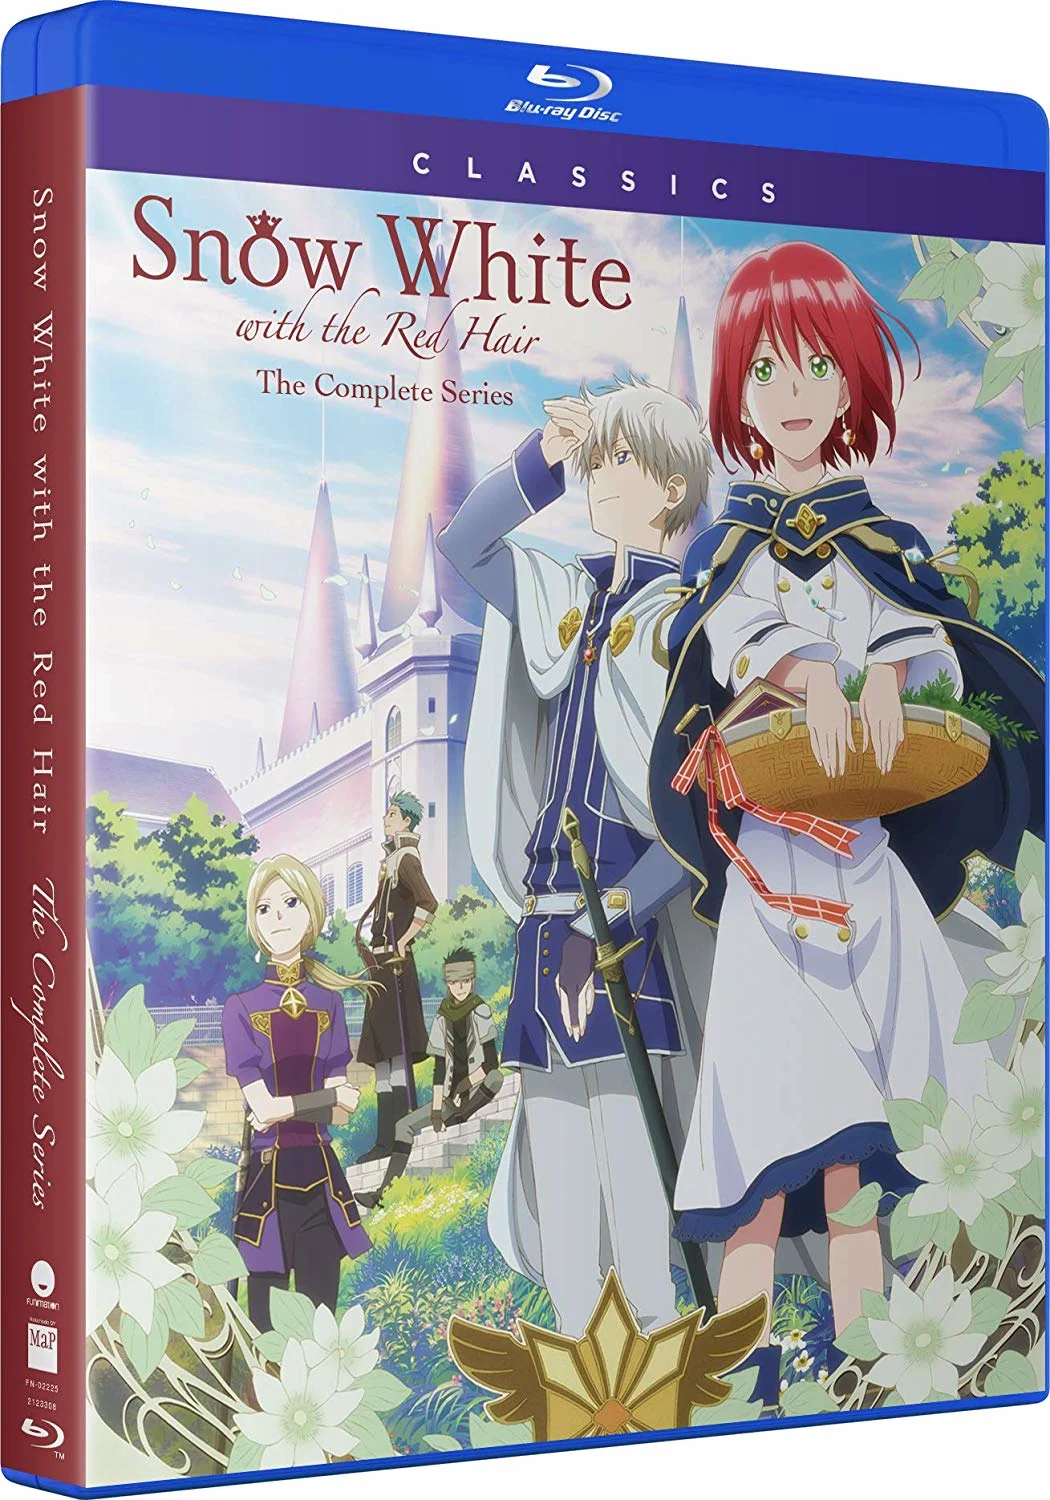 Snow White with the Red Hair: The Complete Series (Classics) (Blu-ray) on MovieShack